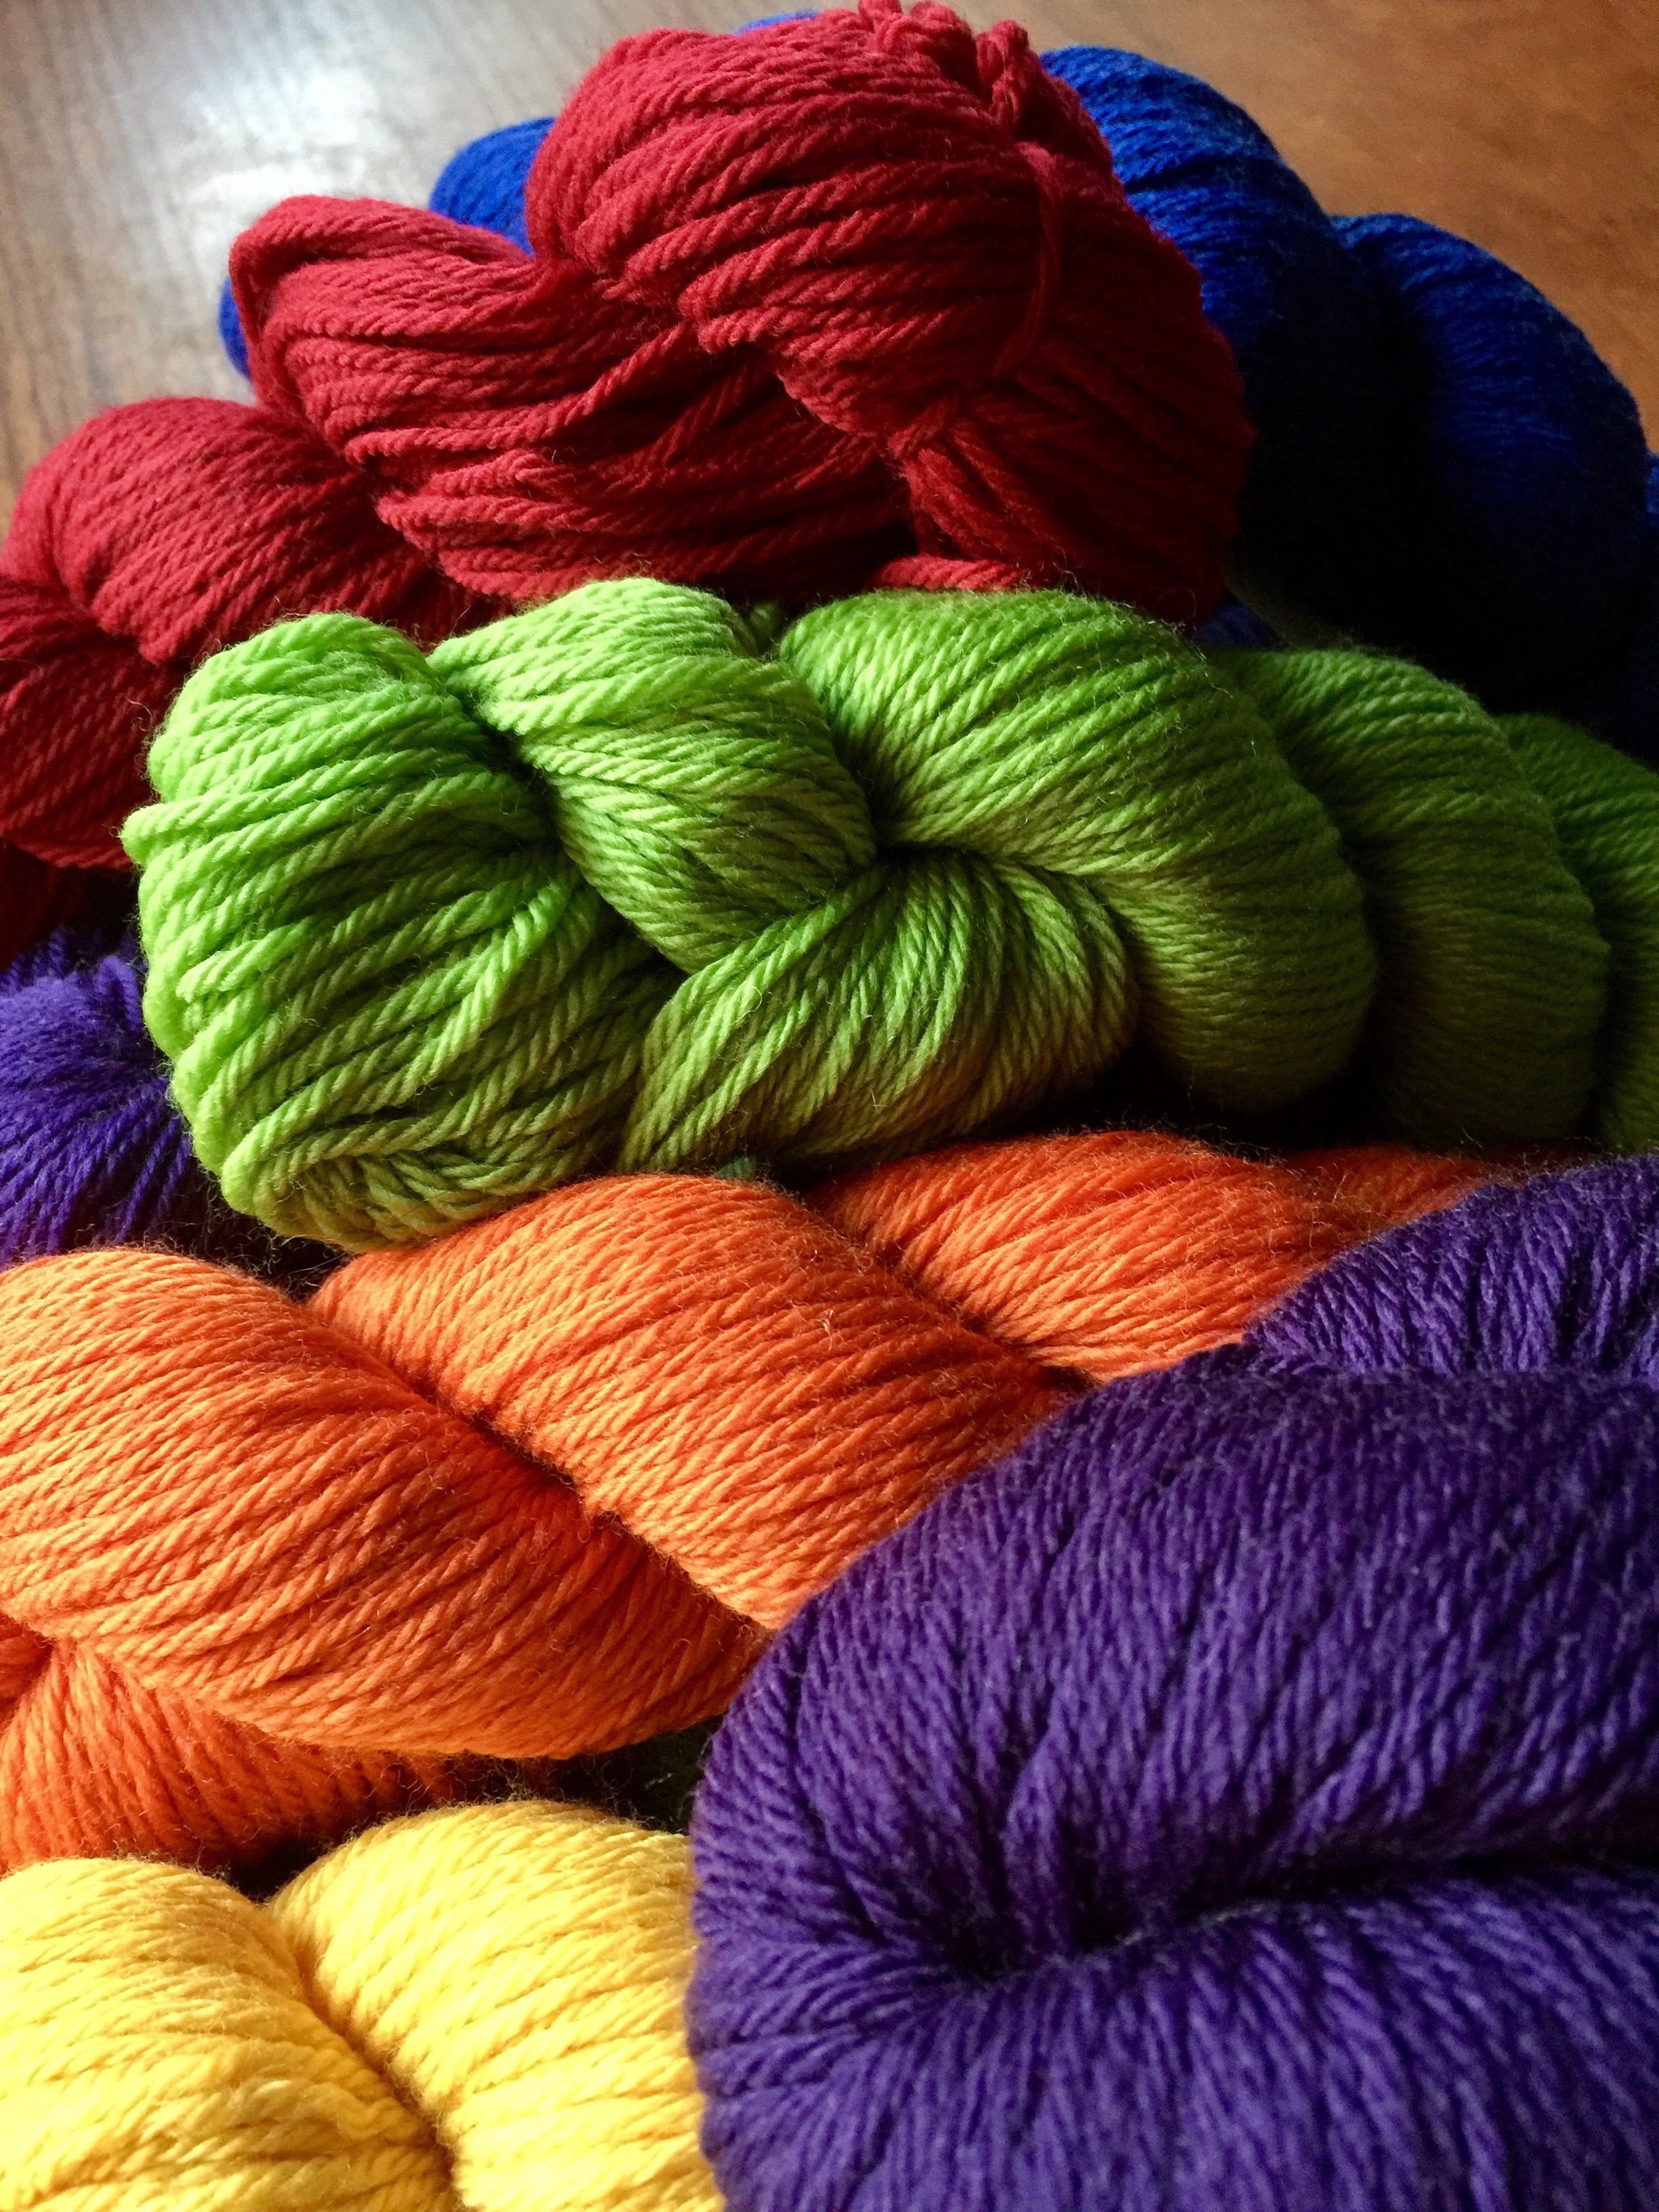 It's easier than you think to find presents for a knitter!